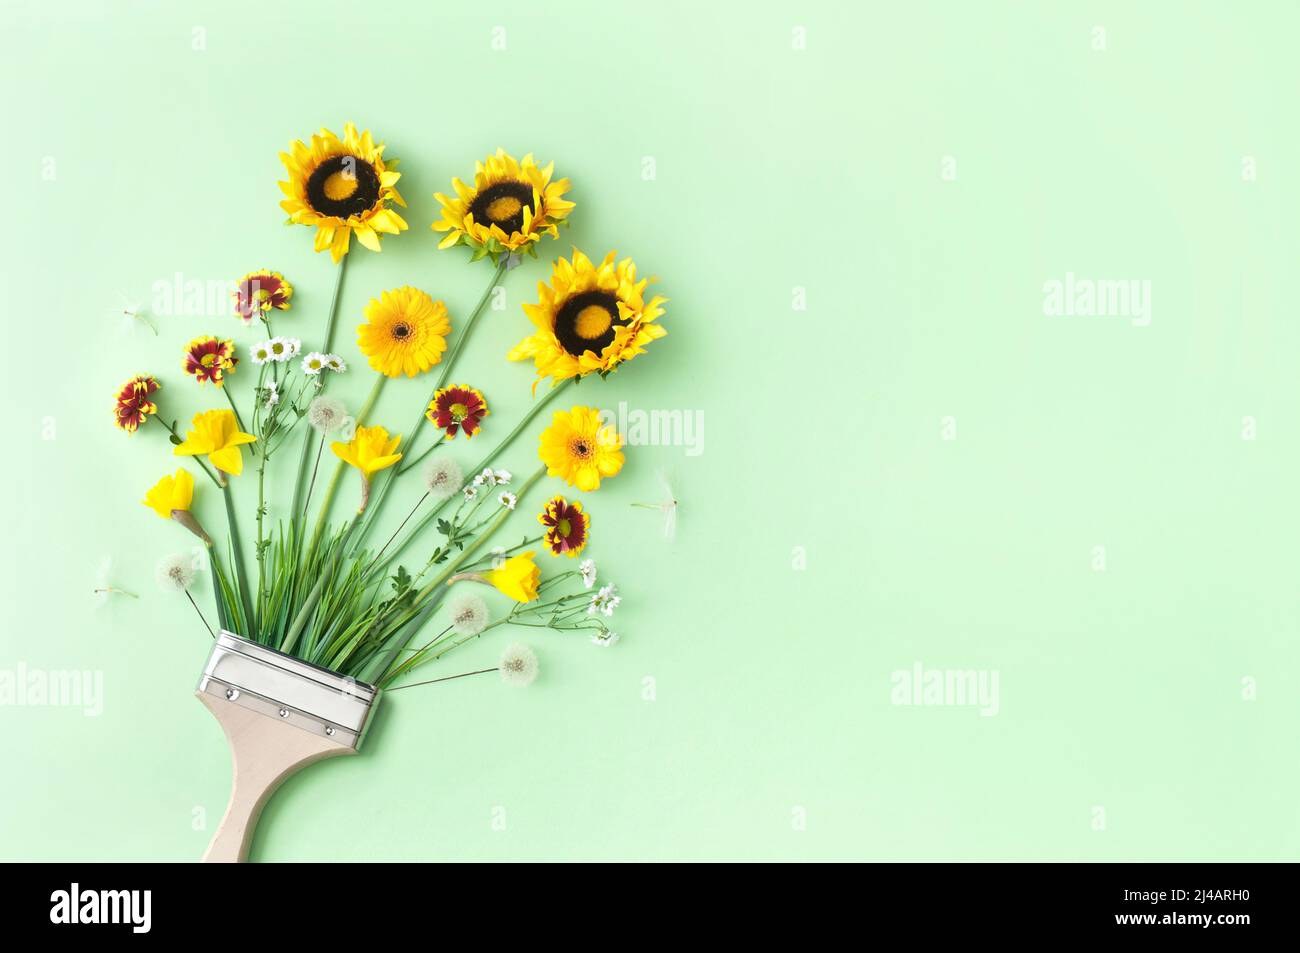 Spring to summer growth cycle paint brush concept, with dandelions, daisies and summer sunflowers Stock Photo